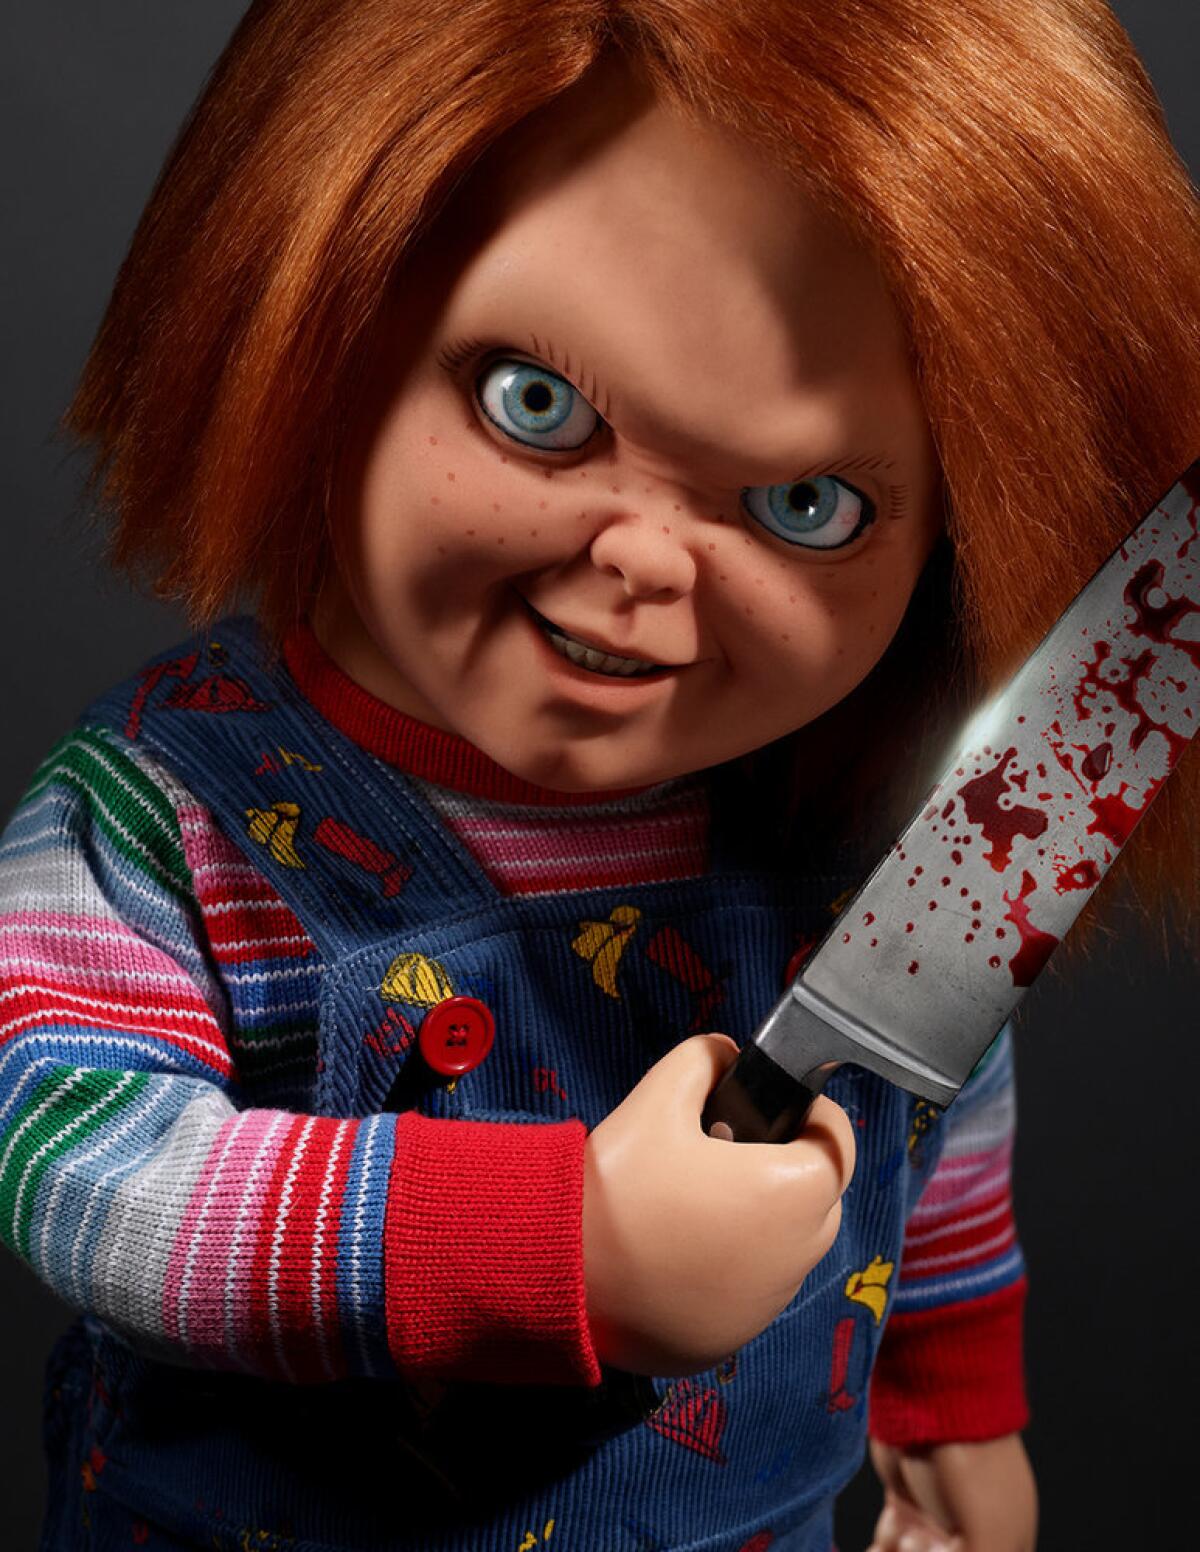 Chucky, the killer "Child's Play" toy, smiling and holding a bloodied knife next to his face